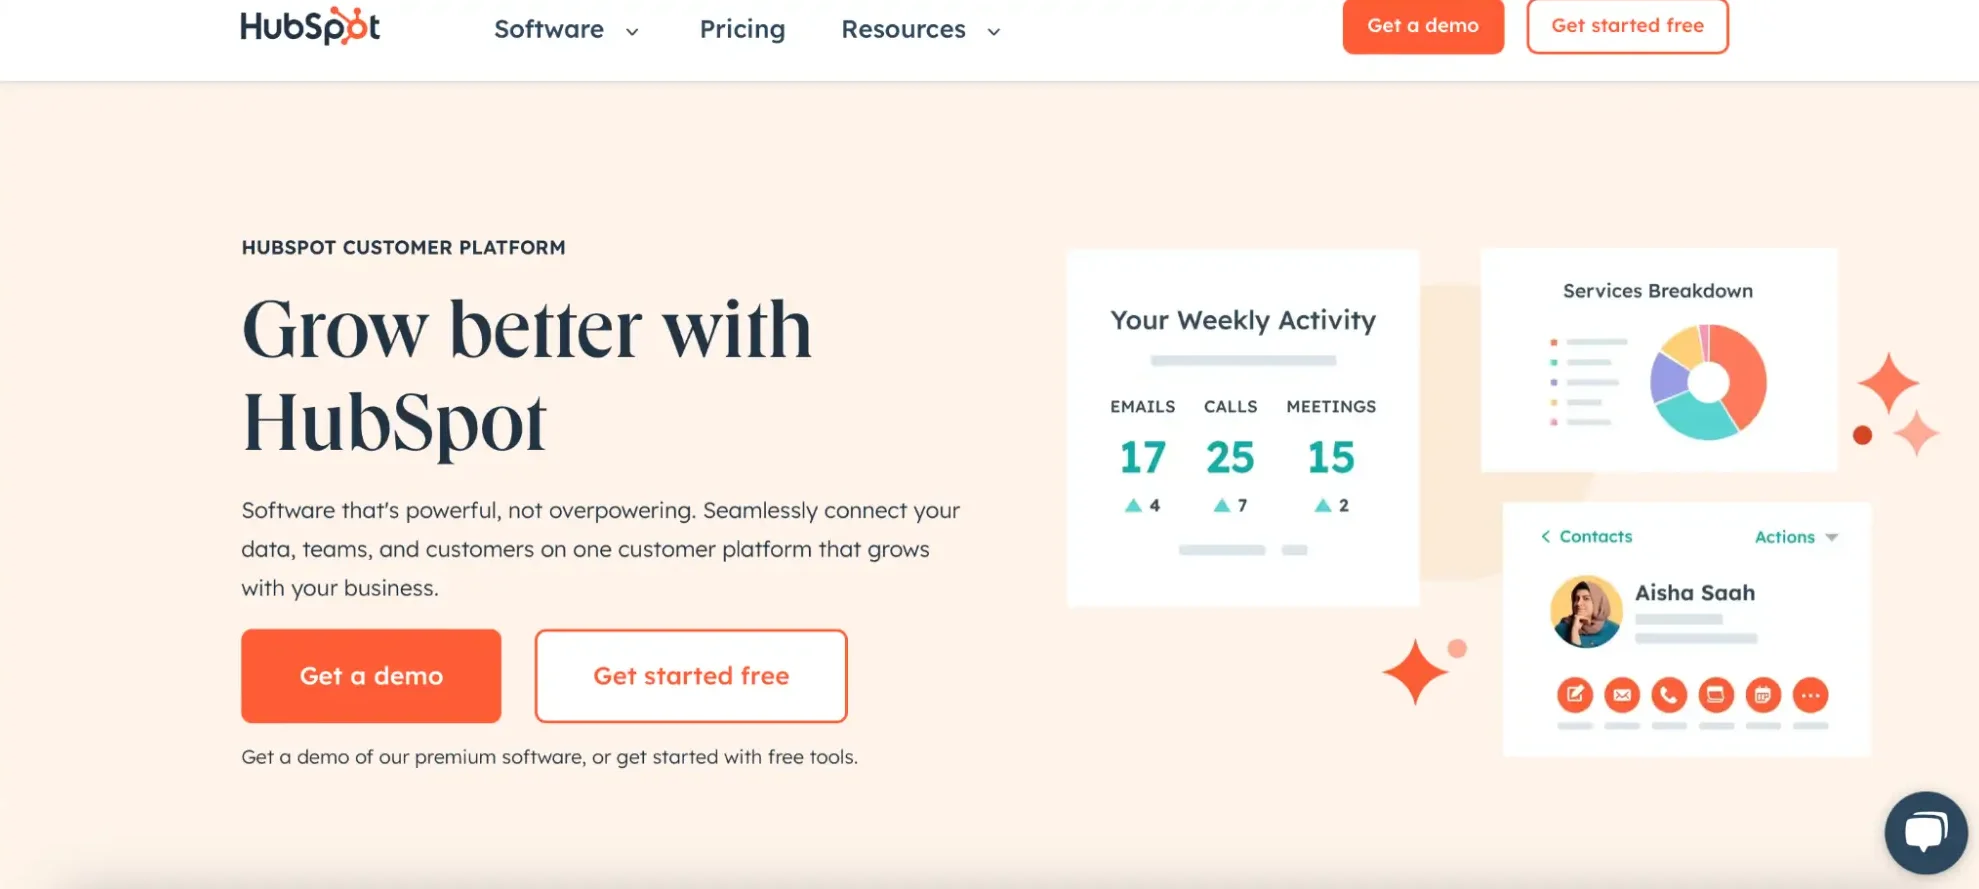 This image shows the Hubspot home page.